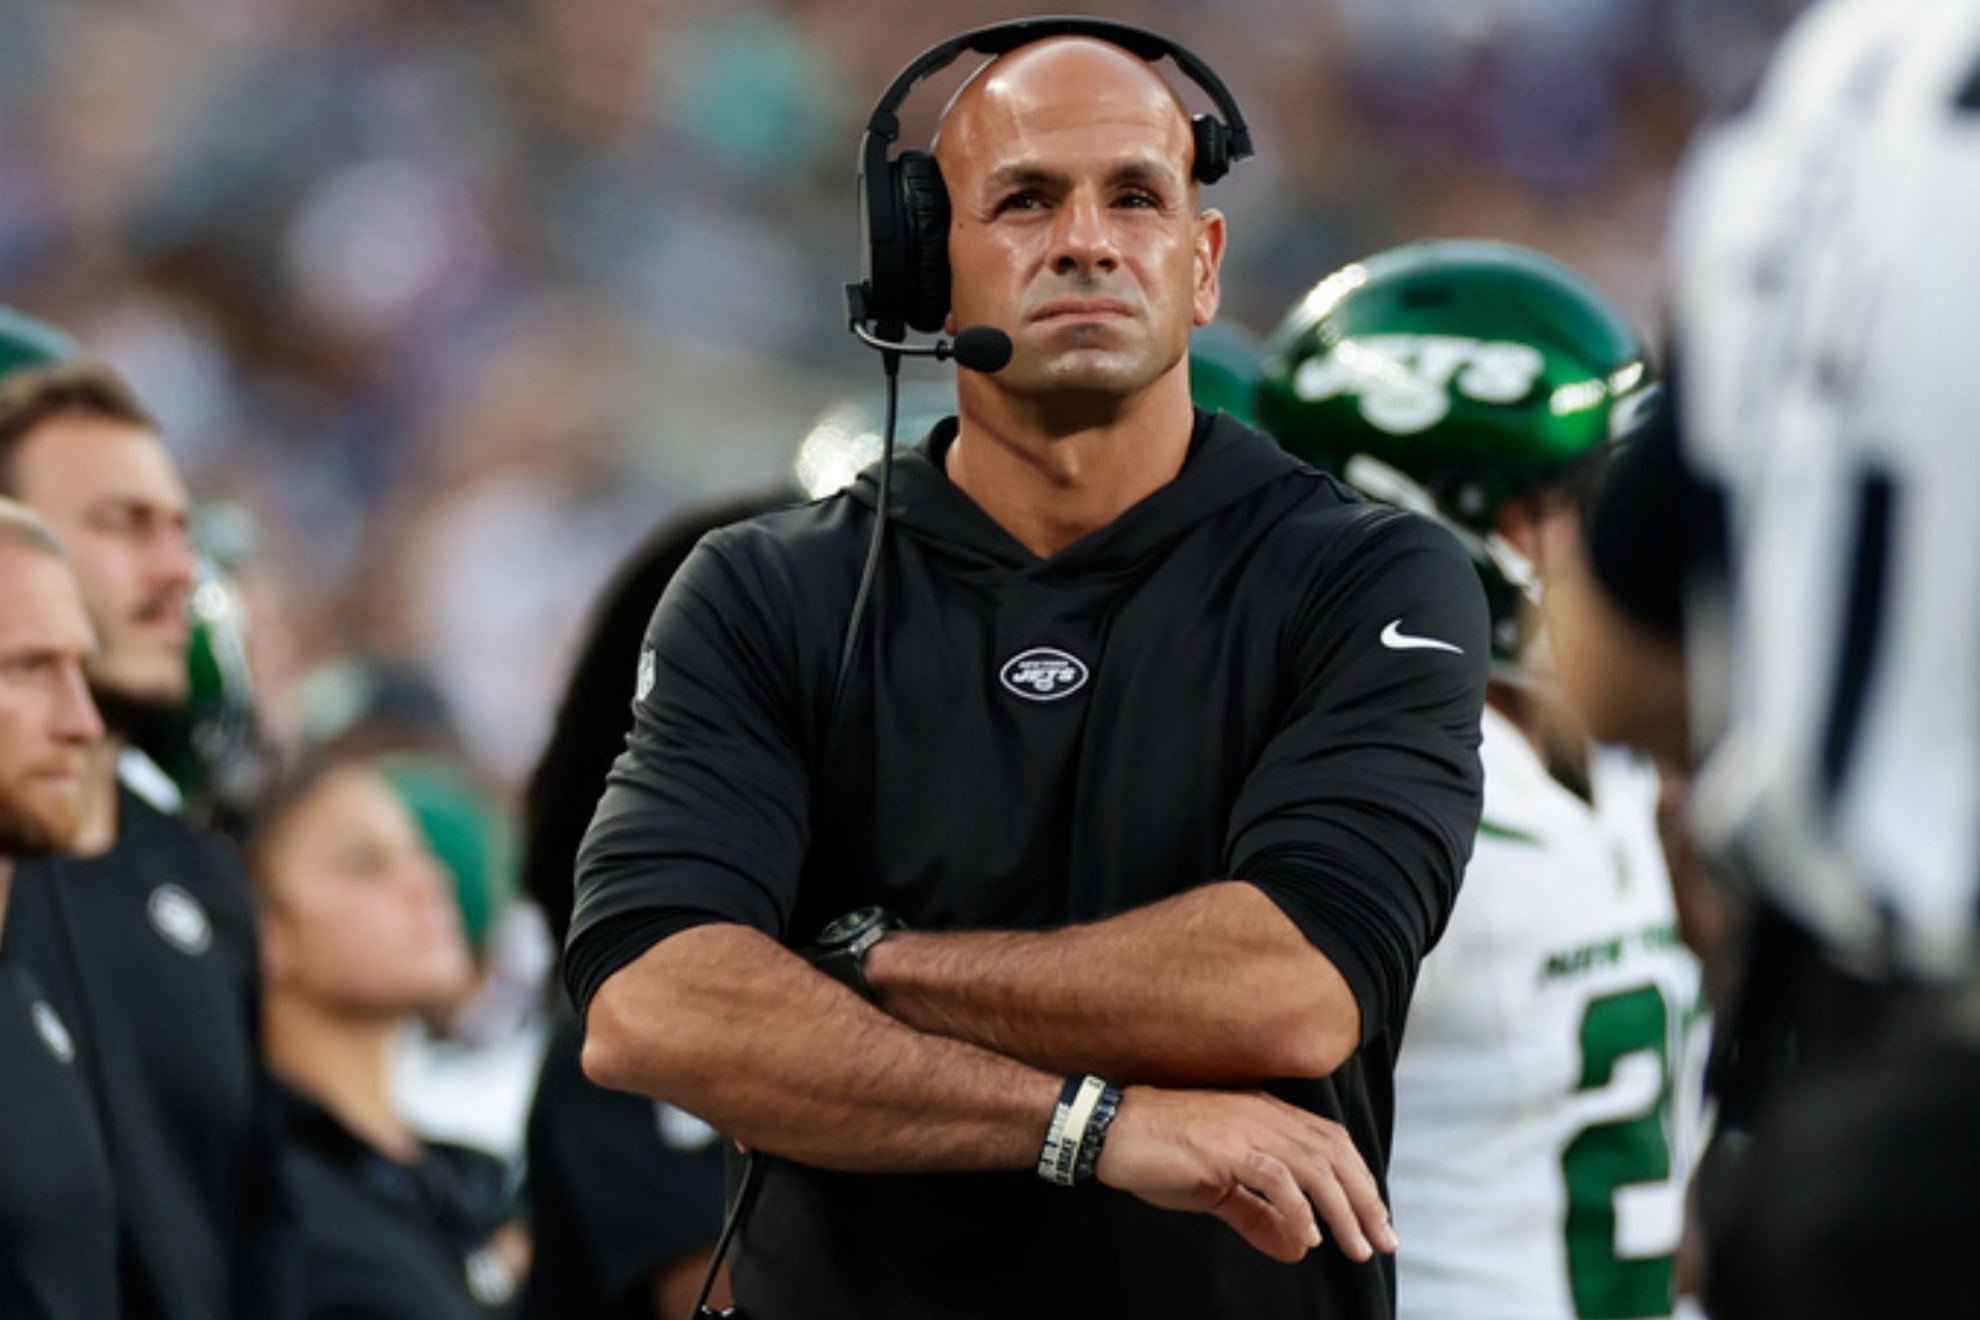 Jets coach Robert Saleh spoke to the media on Tuesday after losing Aaron Rodgers for the season